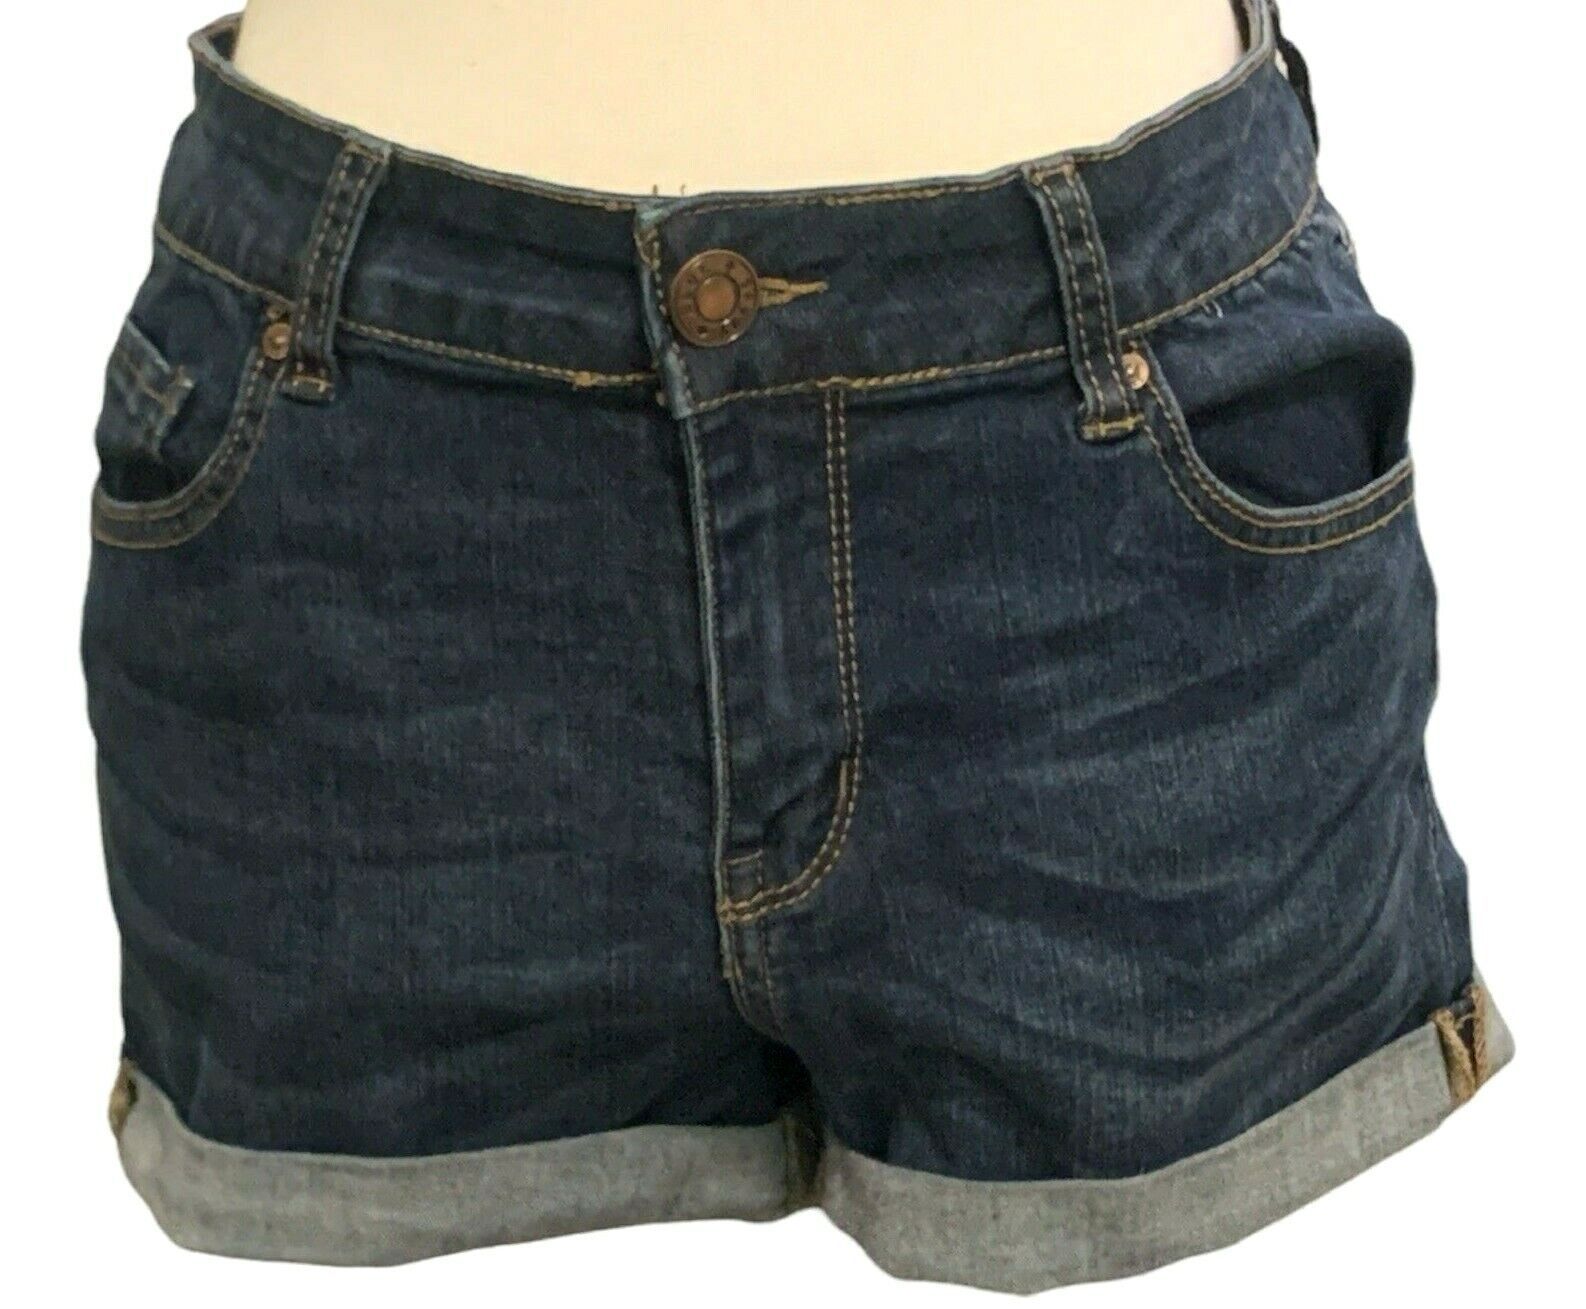 Primary image for Blue Savvy Denim Jeans Mini Shorts Junior’s Size 7/28 Stretch